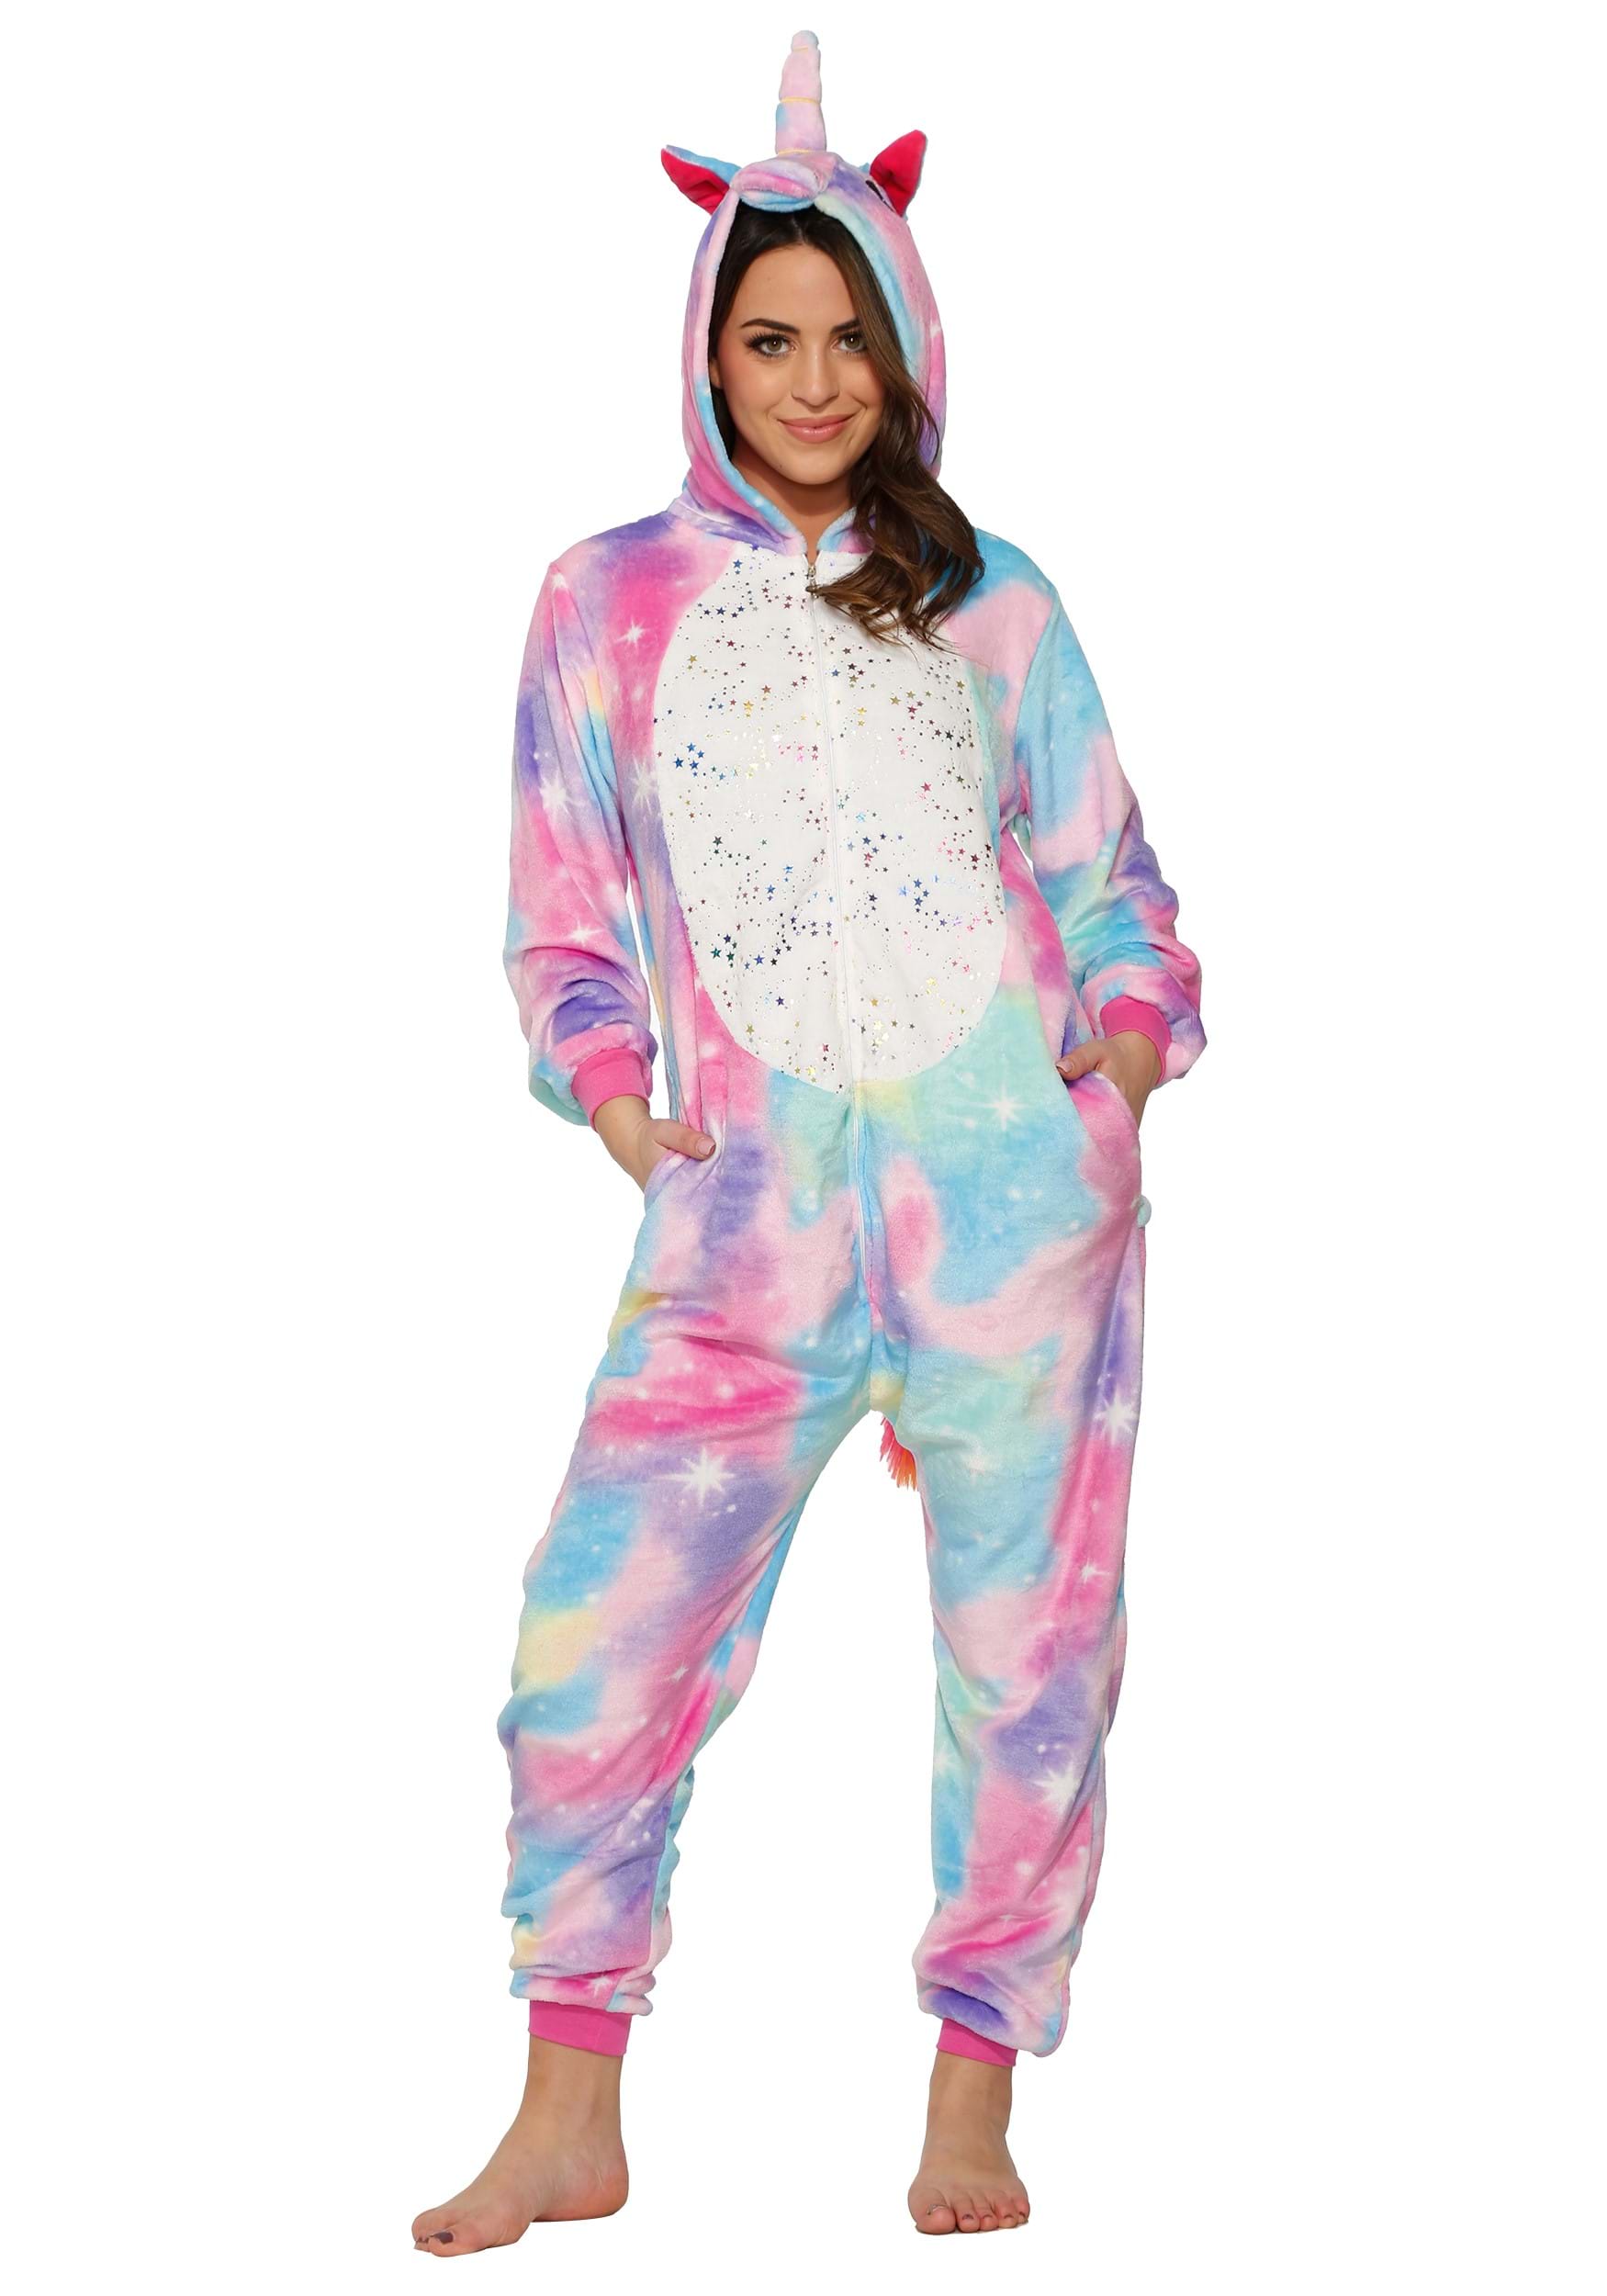 https://images.halloweencostumes.ca/products/83526/1-1/adult-cotton-candy-galaxy-unicorn-onesie.jpg